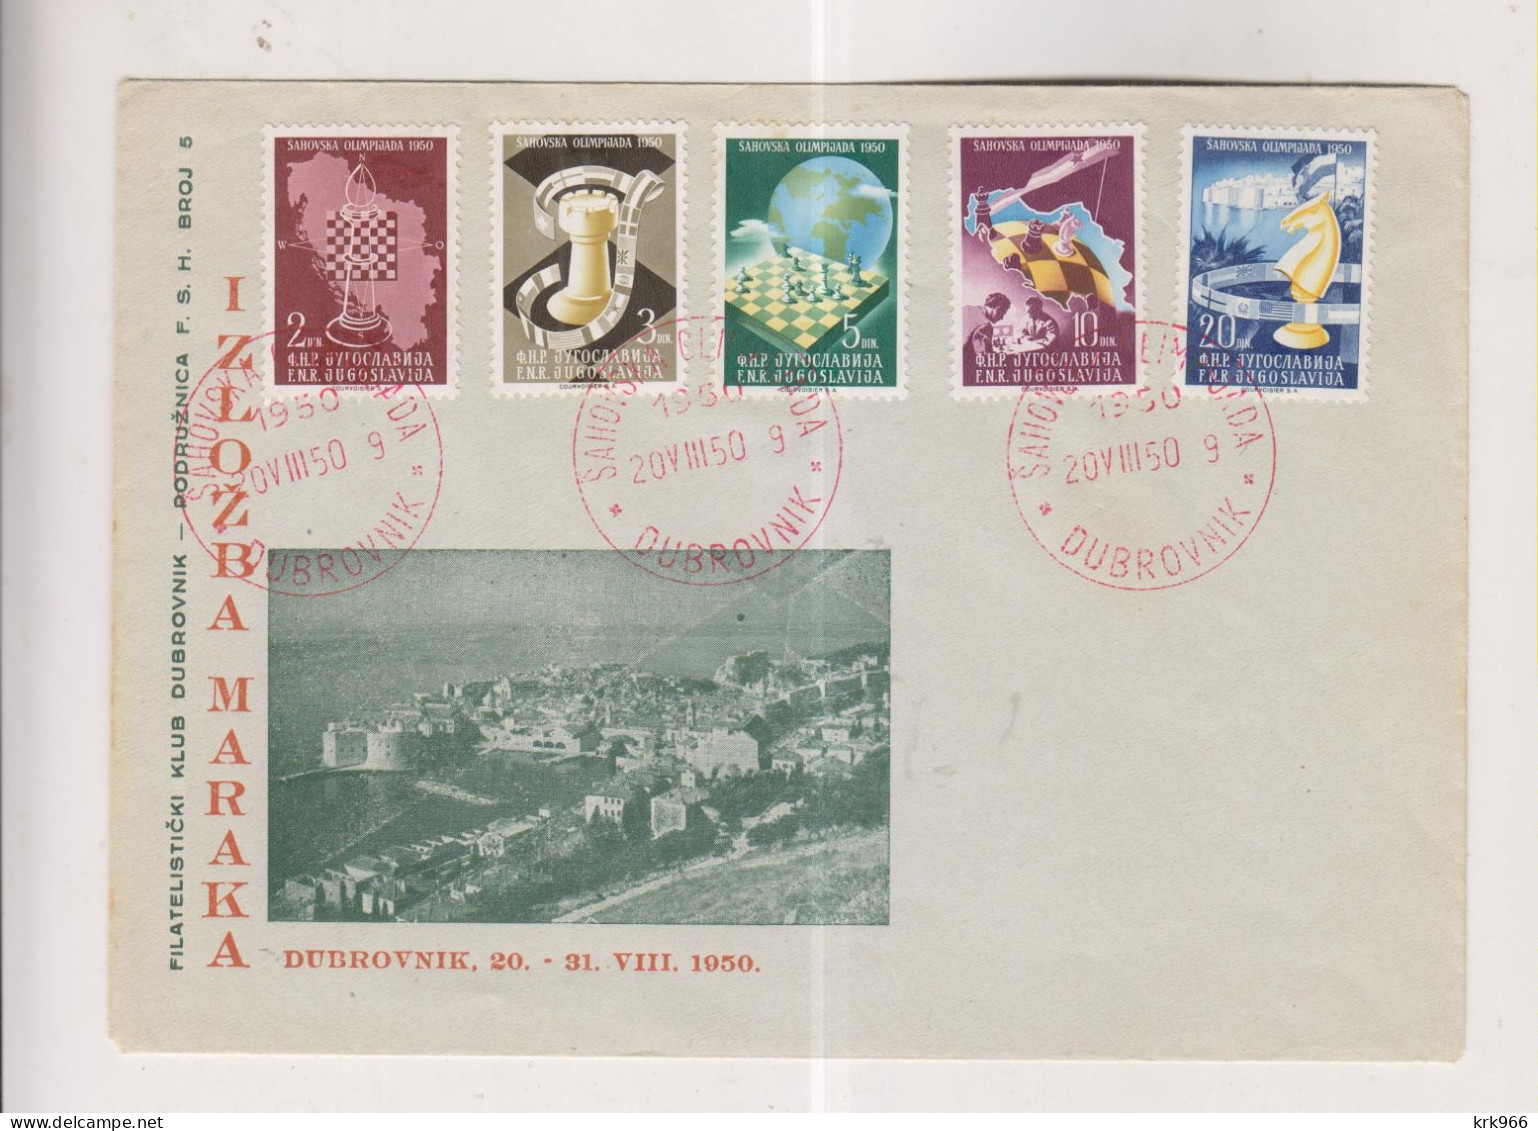 YUGOSLAVIA,1950 DUBROVNIK CHESS OLYMPIC  FDC Cover - Covers & Documents